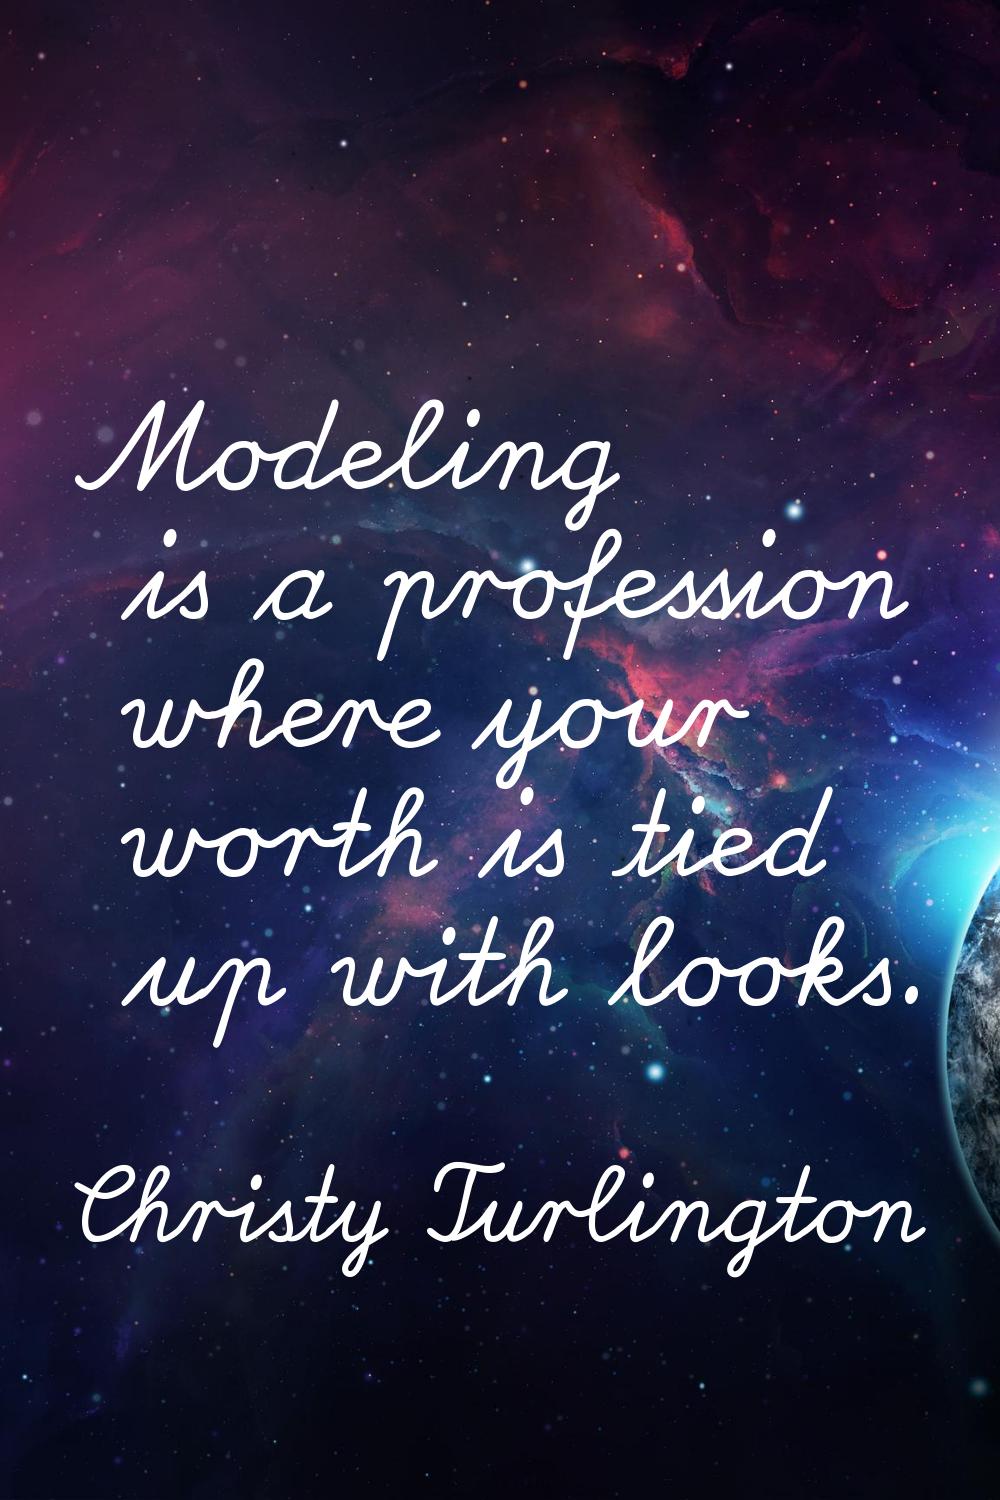 Modeling is a profession where your worth is tied up with looks.